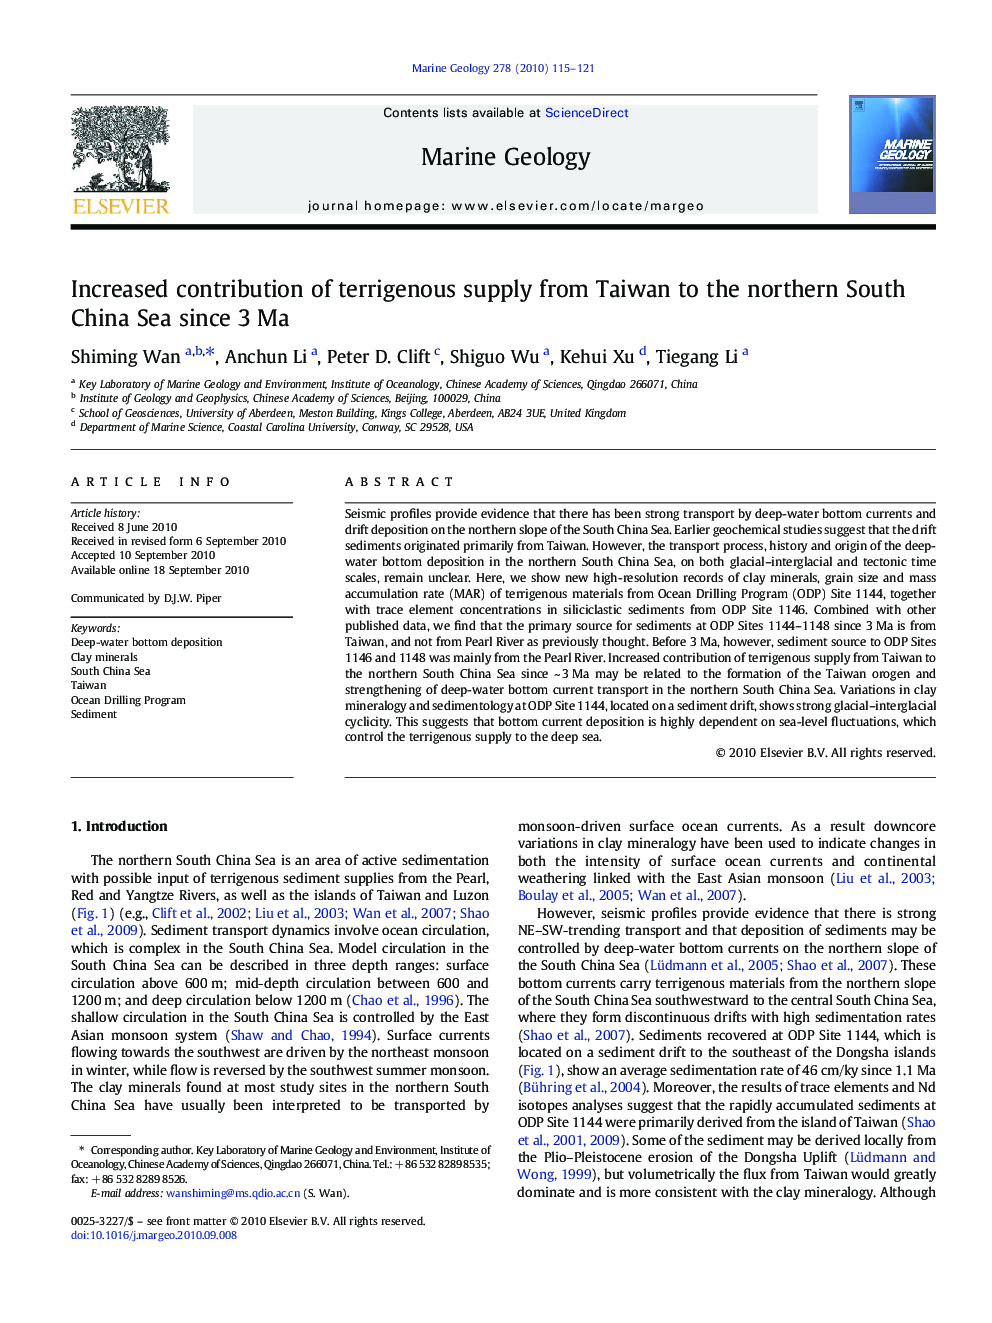 Increased contribution of terrigenous supply from Taiwan to the northern South China Sea since 3 Ma